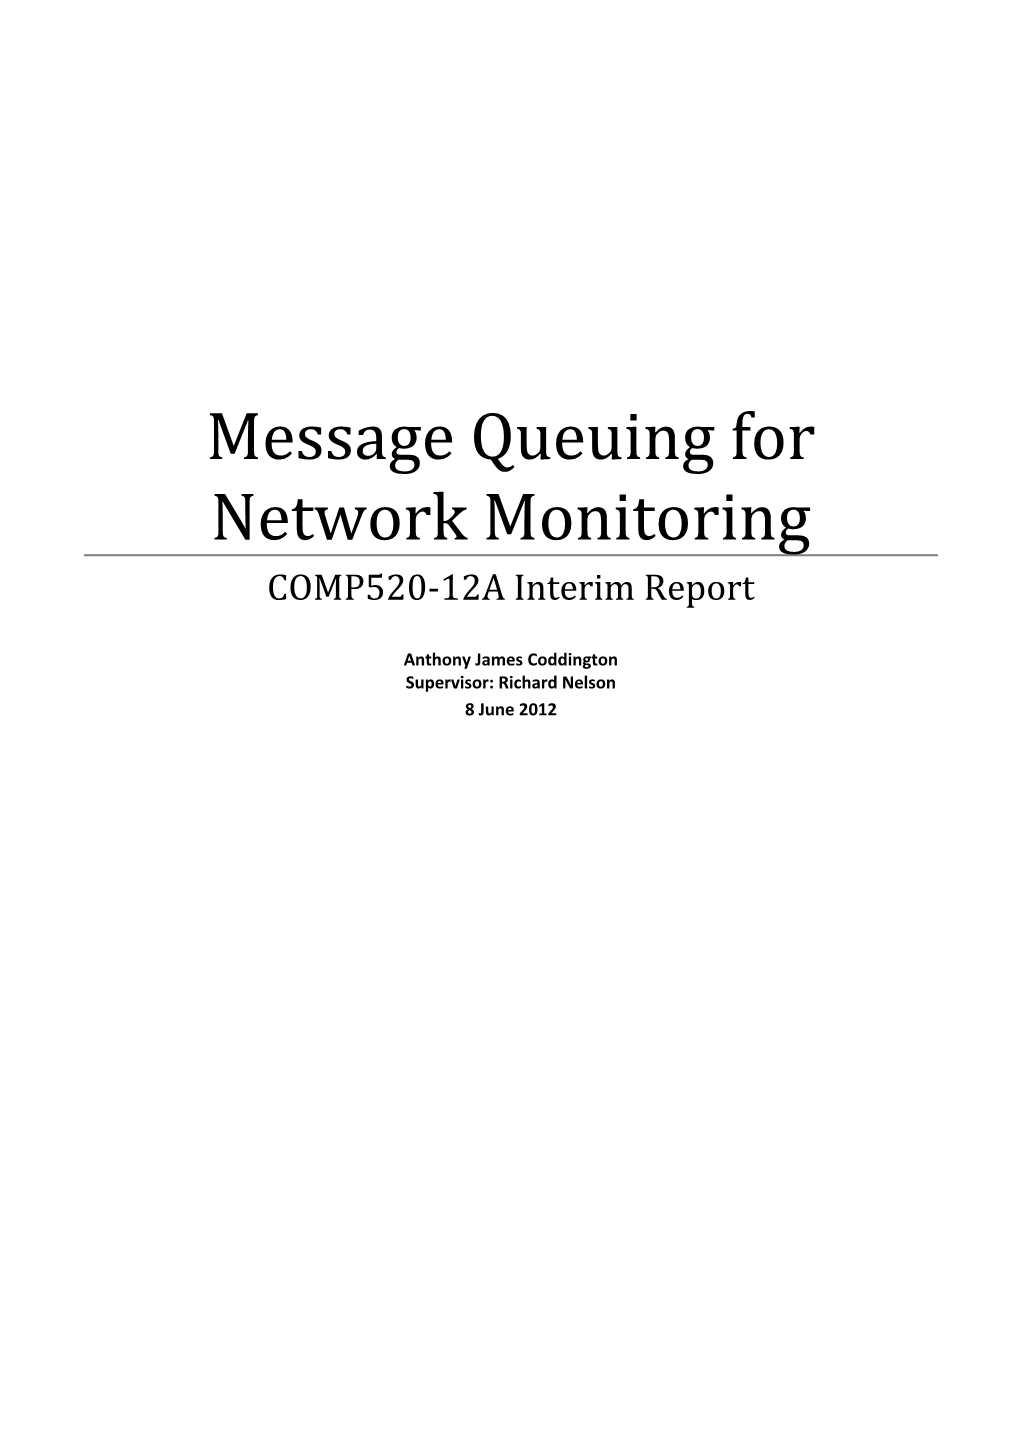 Message Queuing for Network Monitoring